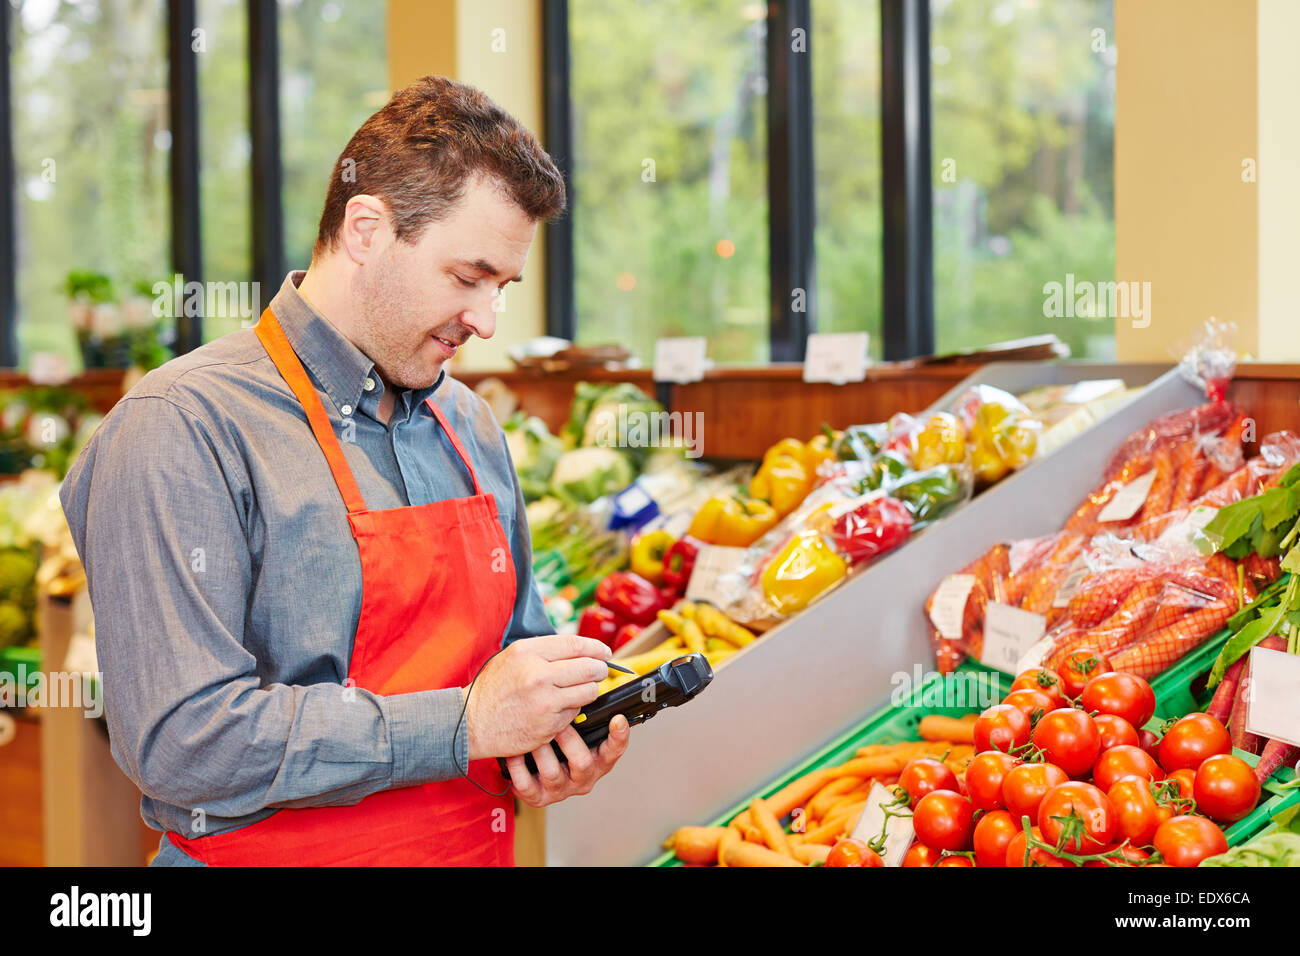 Store manager in supermarket using a mobile data registration terminal Stock Photo